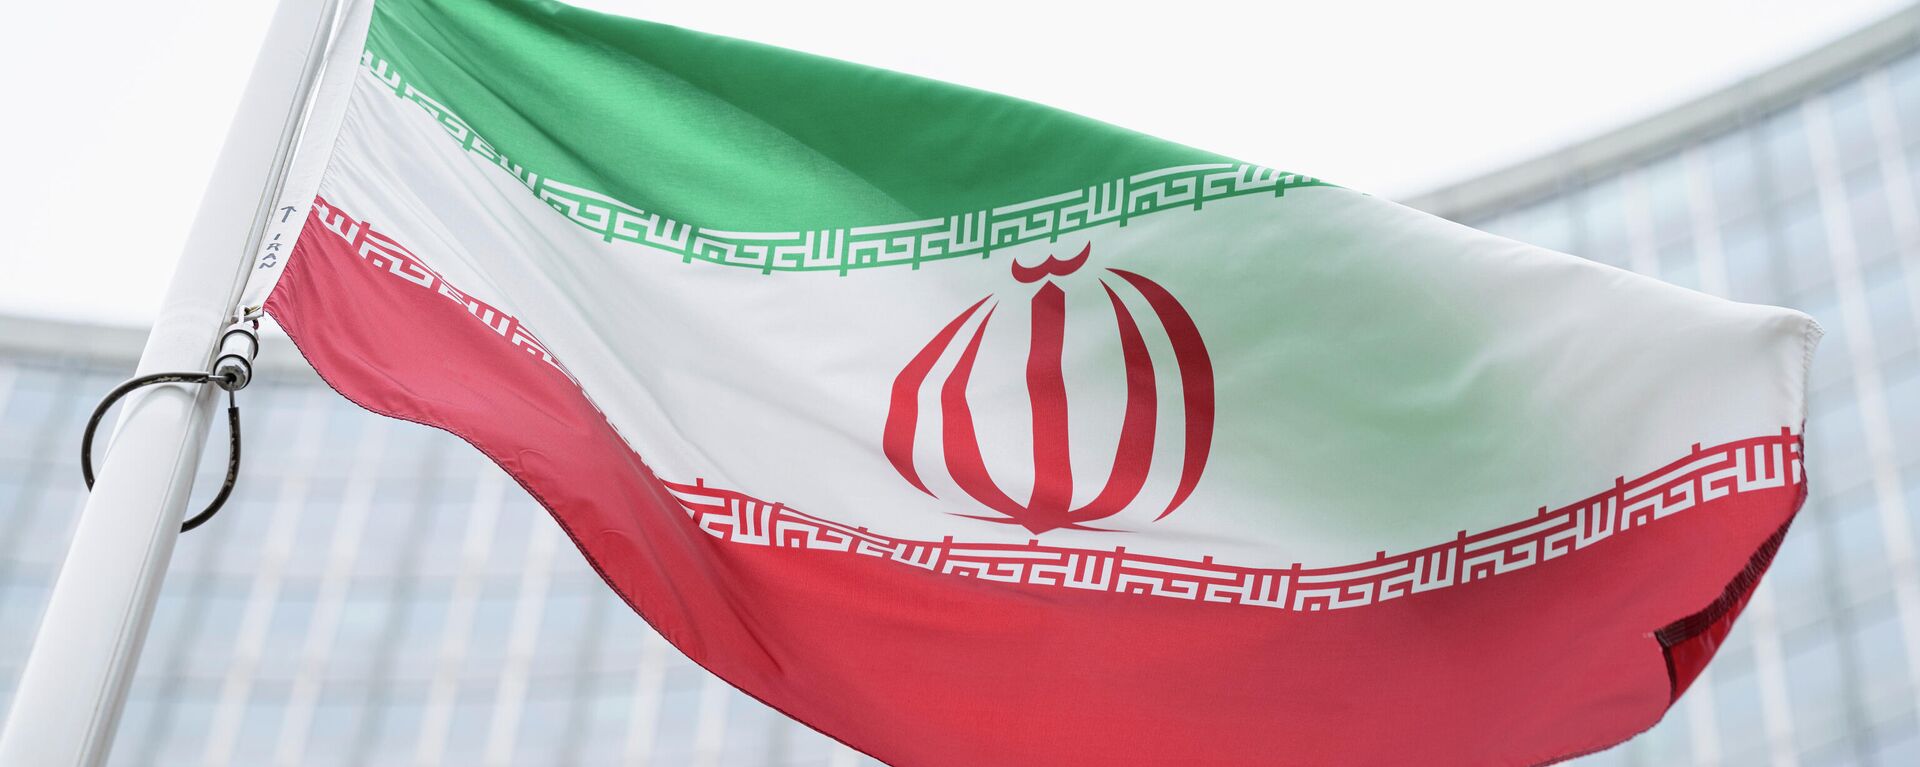 FILE - The flag of Iran waves in front of the the International Center building with the headquarters of the International Atomic Energy Agency, IAEA, in Vienna, AustriaI, May 24, 2021. On Monday, Nov. 29, 2021, negotiators are gathering in Vienna to resume efforts to revive Iran's 2015 nuclear deal with world powers, with hopes of quick progress muted after the arrival of a hard-line new government in Tehran led to a more than five-month hiatus. (AP Photo/Florian Schroetter, FILE) - Sputnik International, 1920, 13.03.2022